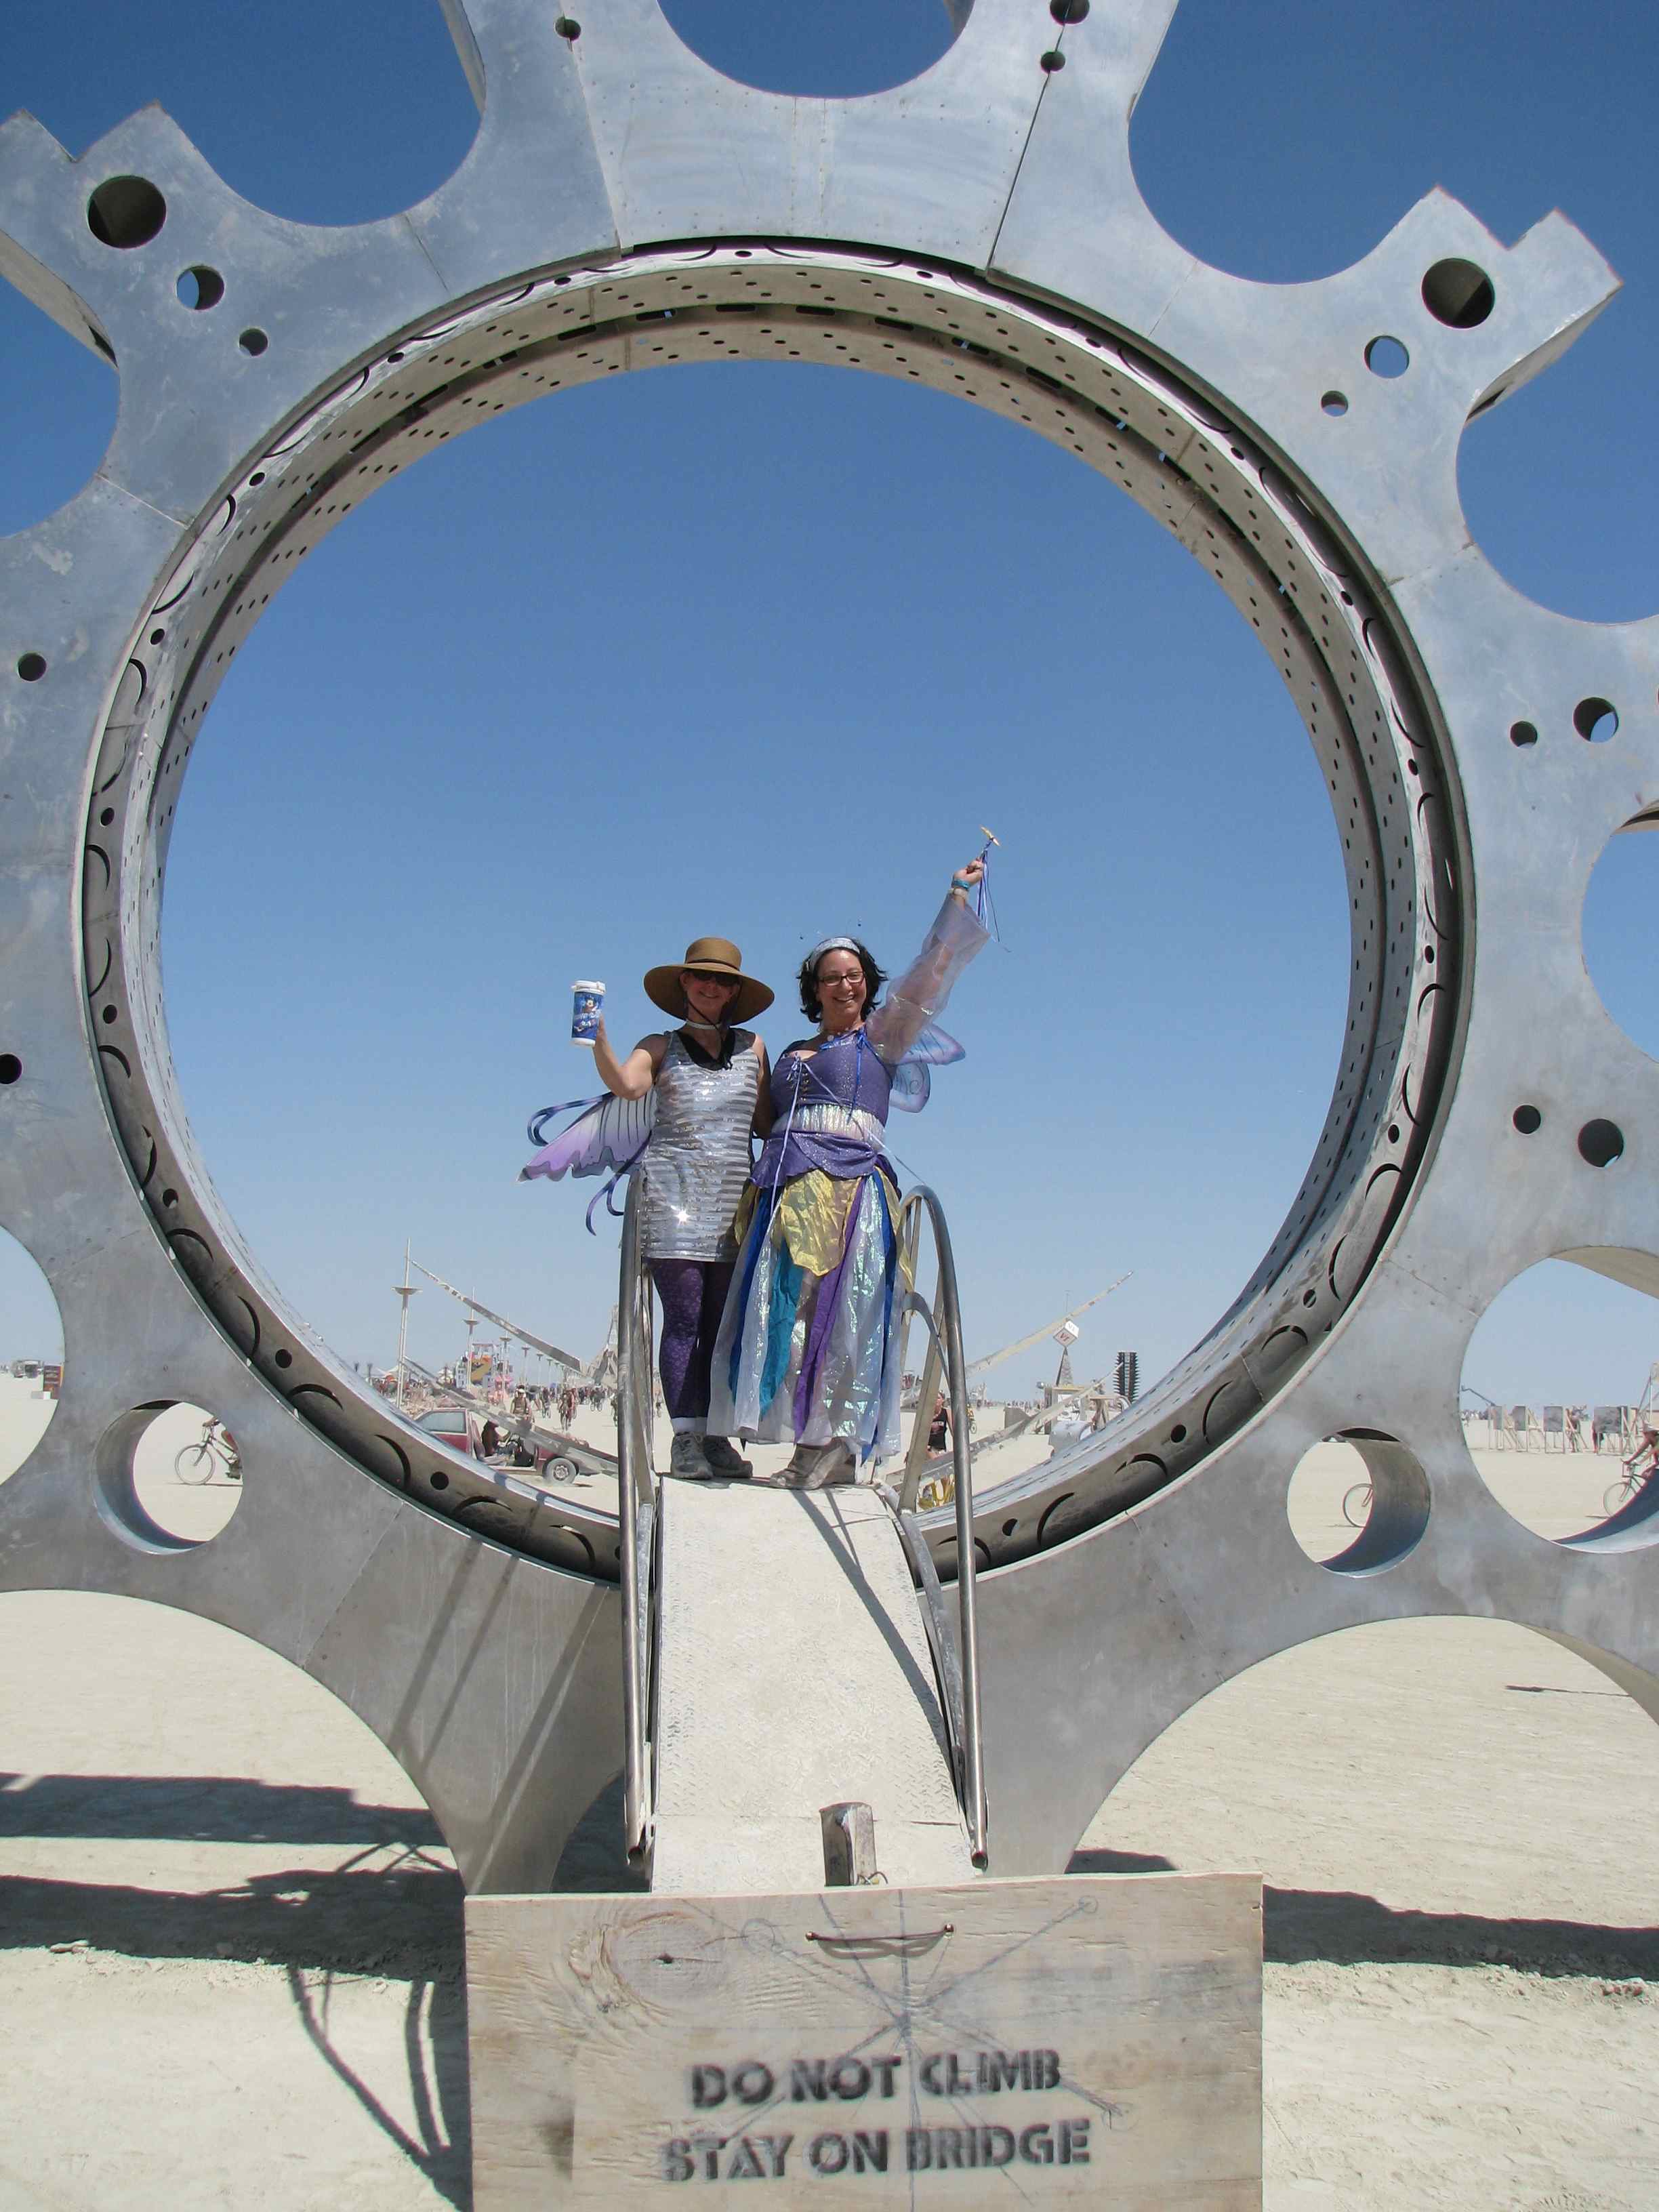 Isis and Supernova in the Metal Ring Sculpture-Burning Man 2011